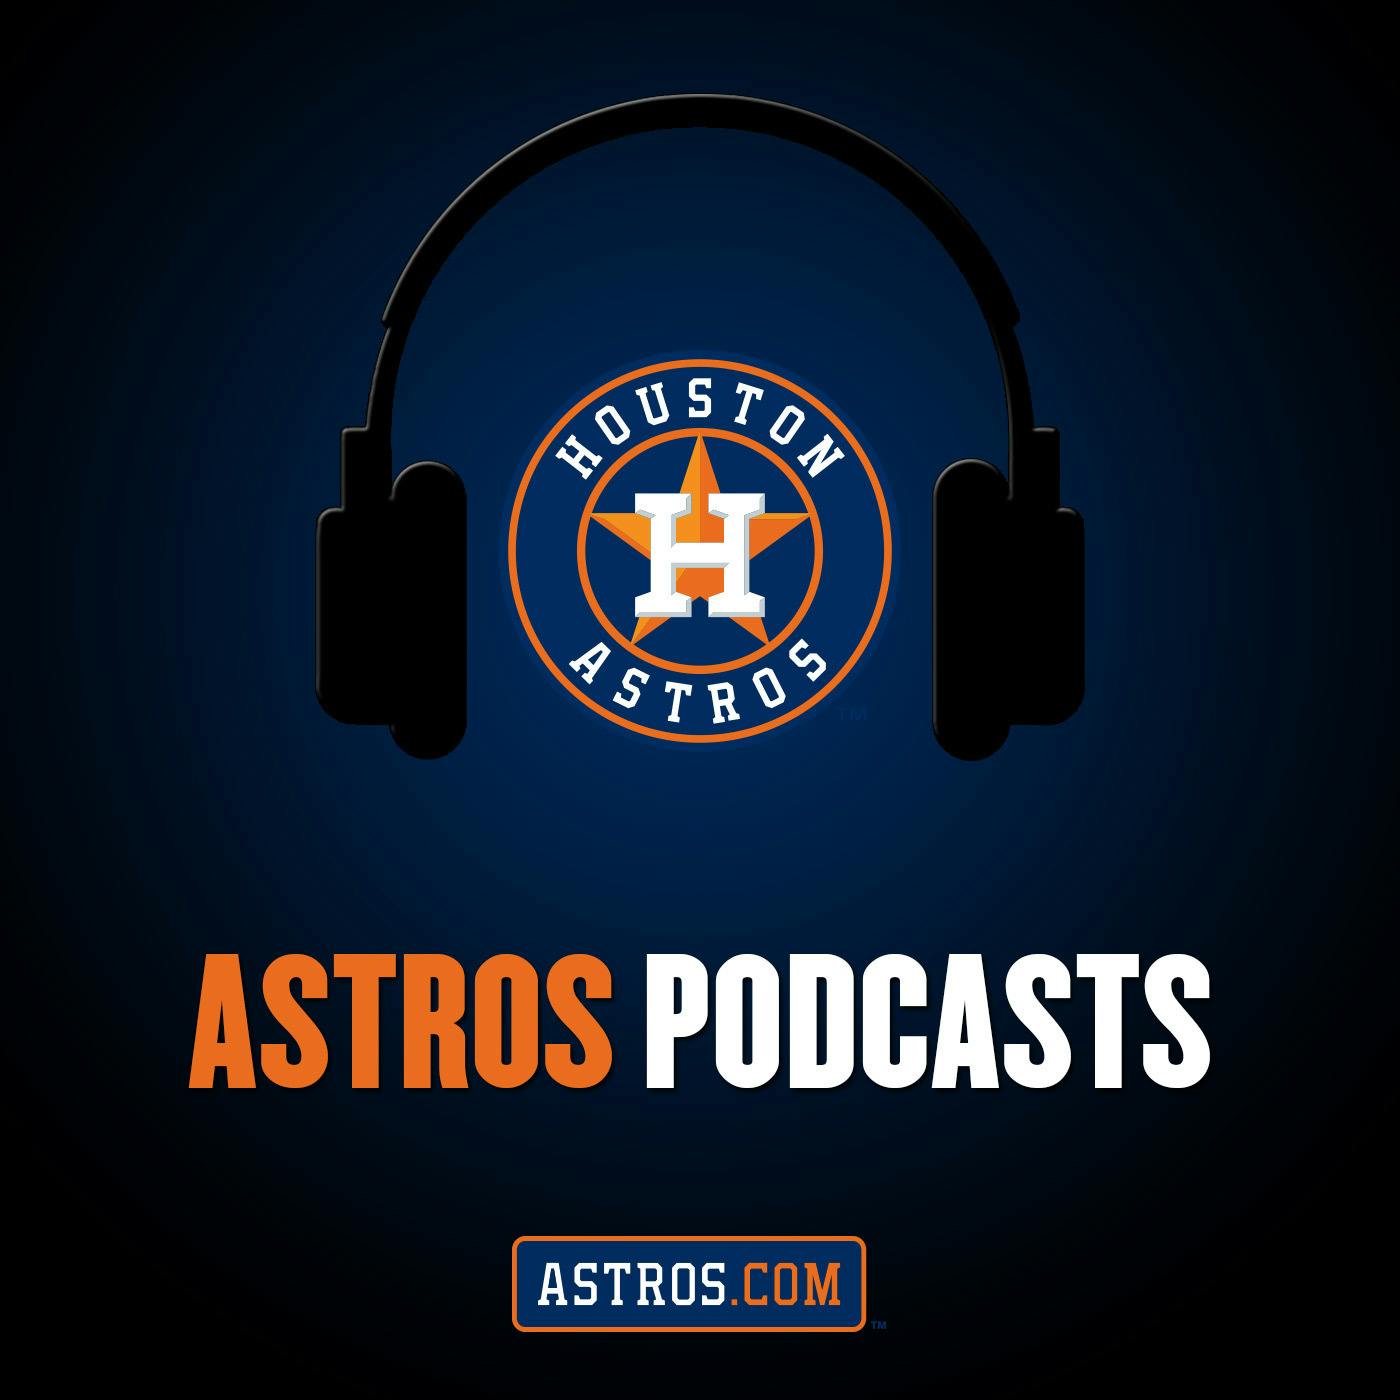 10/11 ASTROCAST by KARBACH BREWING: ALCS GM1 Preview, General Manager James Click, Dusty Baker, Lance McCullers, Carlos Correa, Enoli Paredes